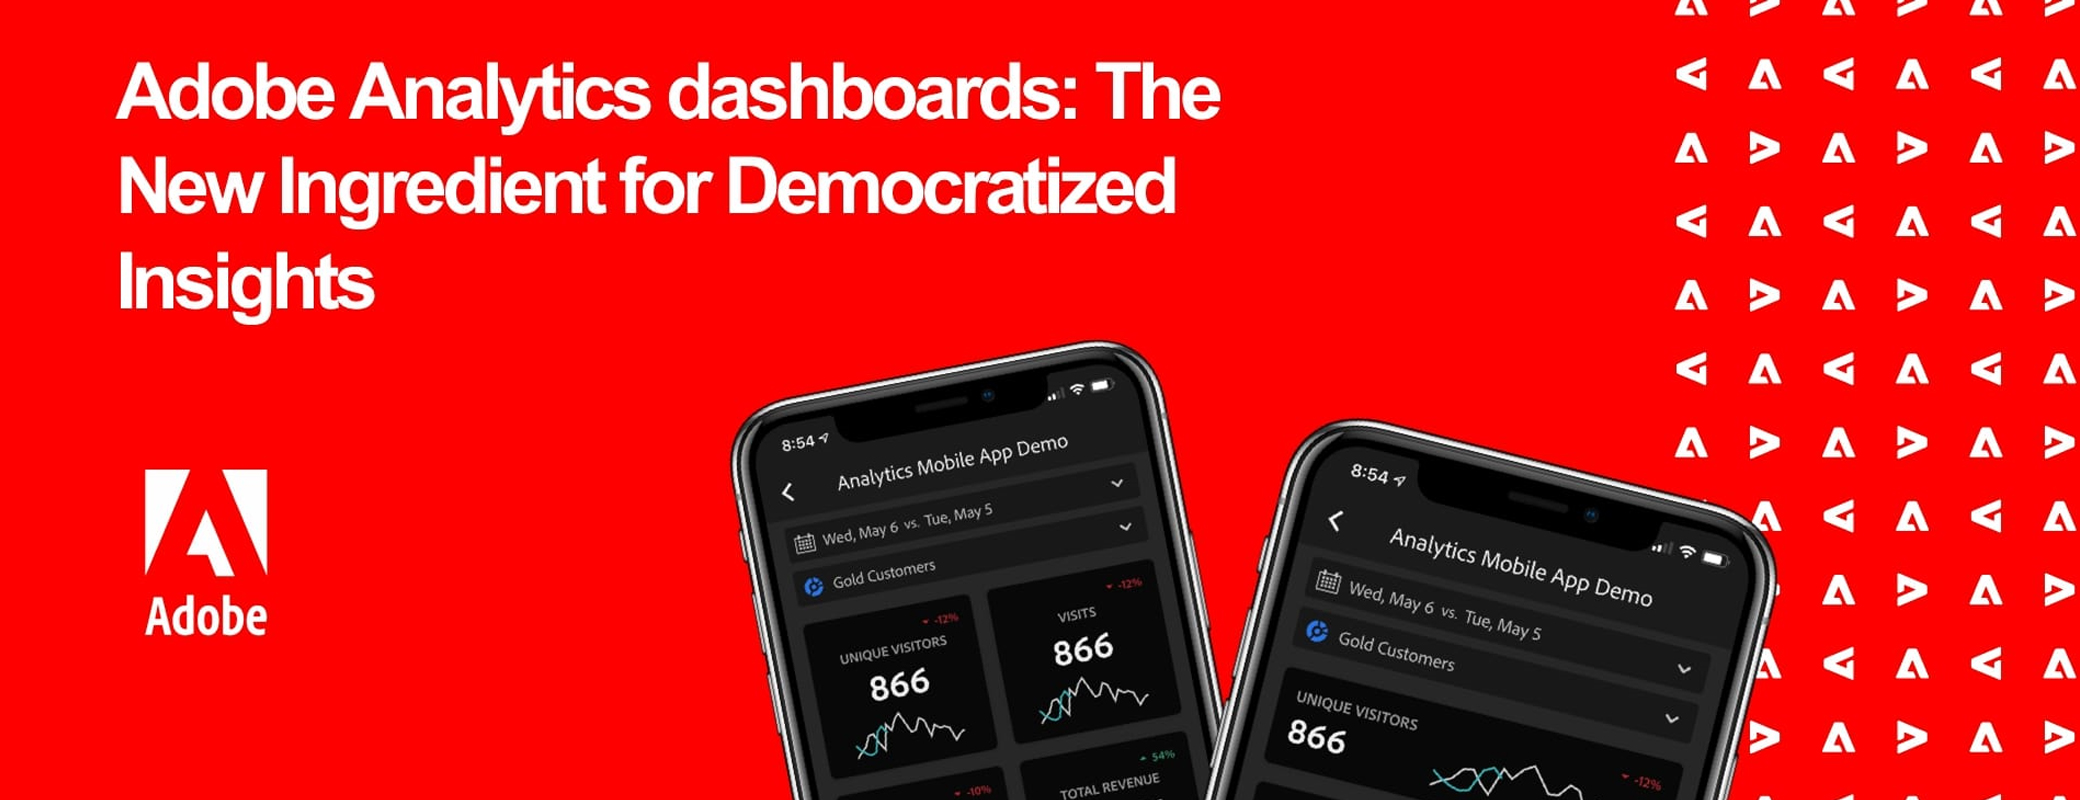 Adobe Analytics Dashboards: A New Ingredient for Democratized Insights